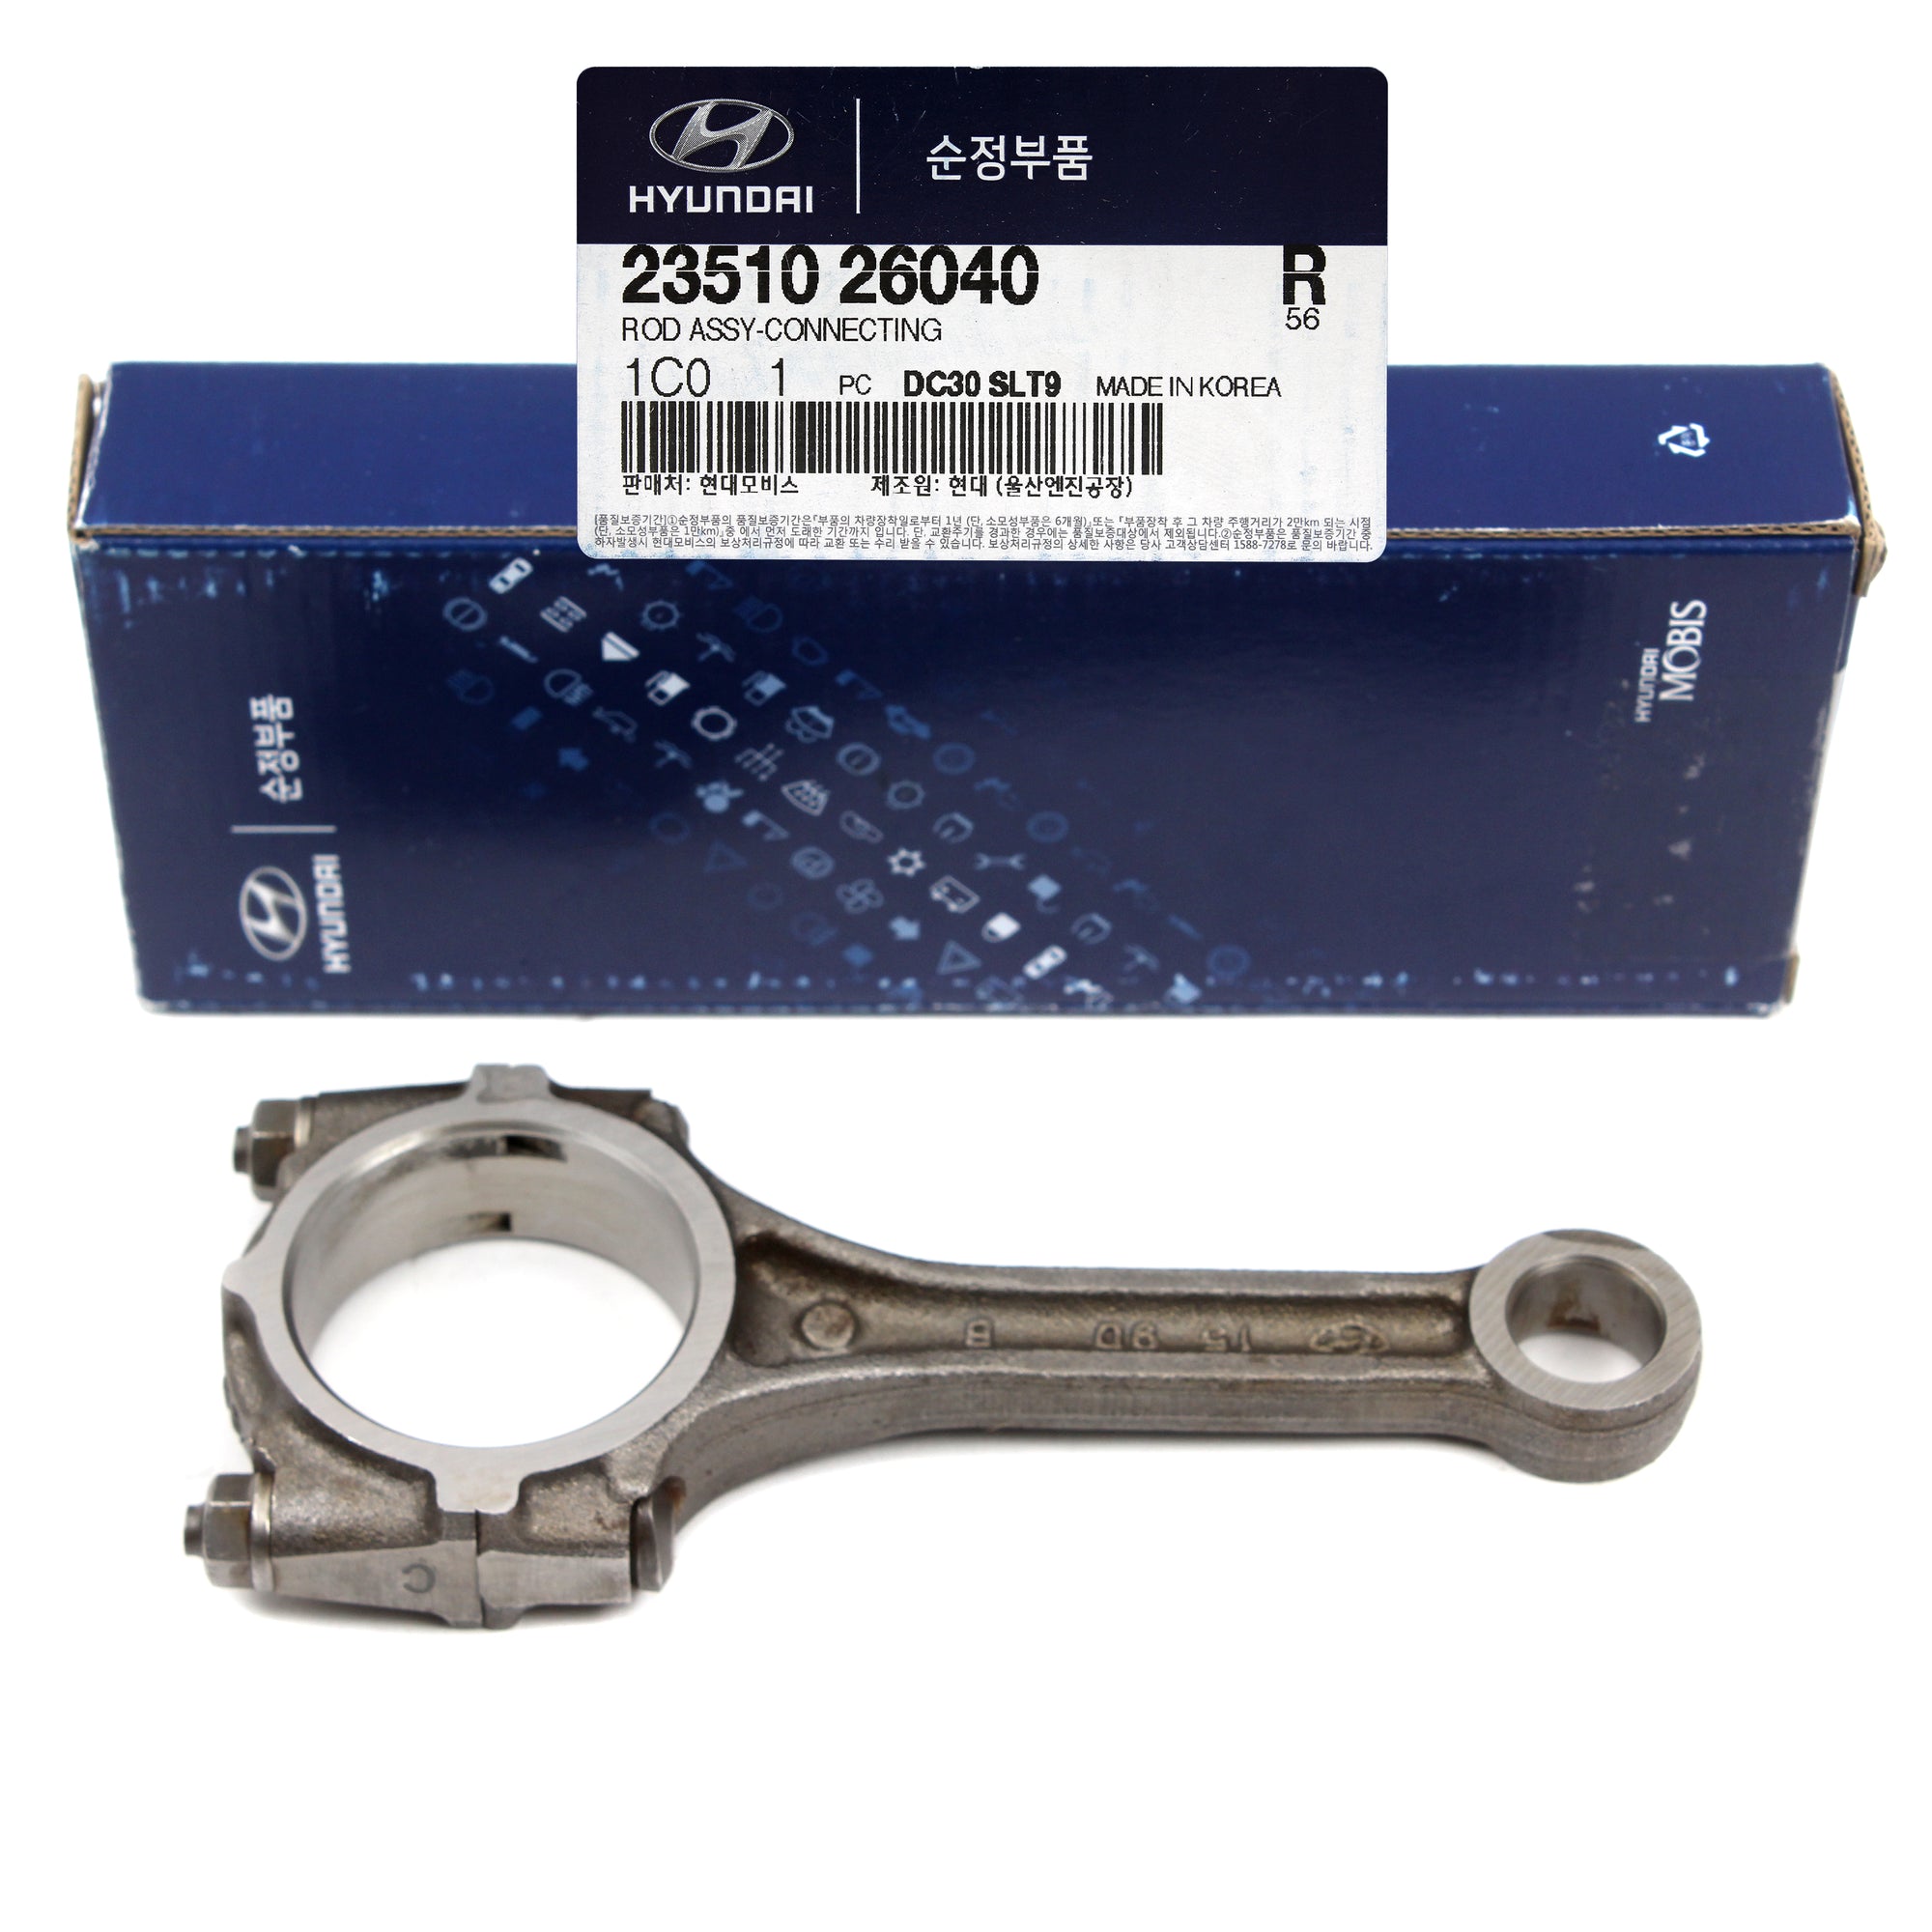 GENUINE Connecting Rod for 93-10 Hyundai Accent Scoupe Rio 2351026040